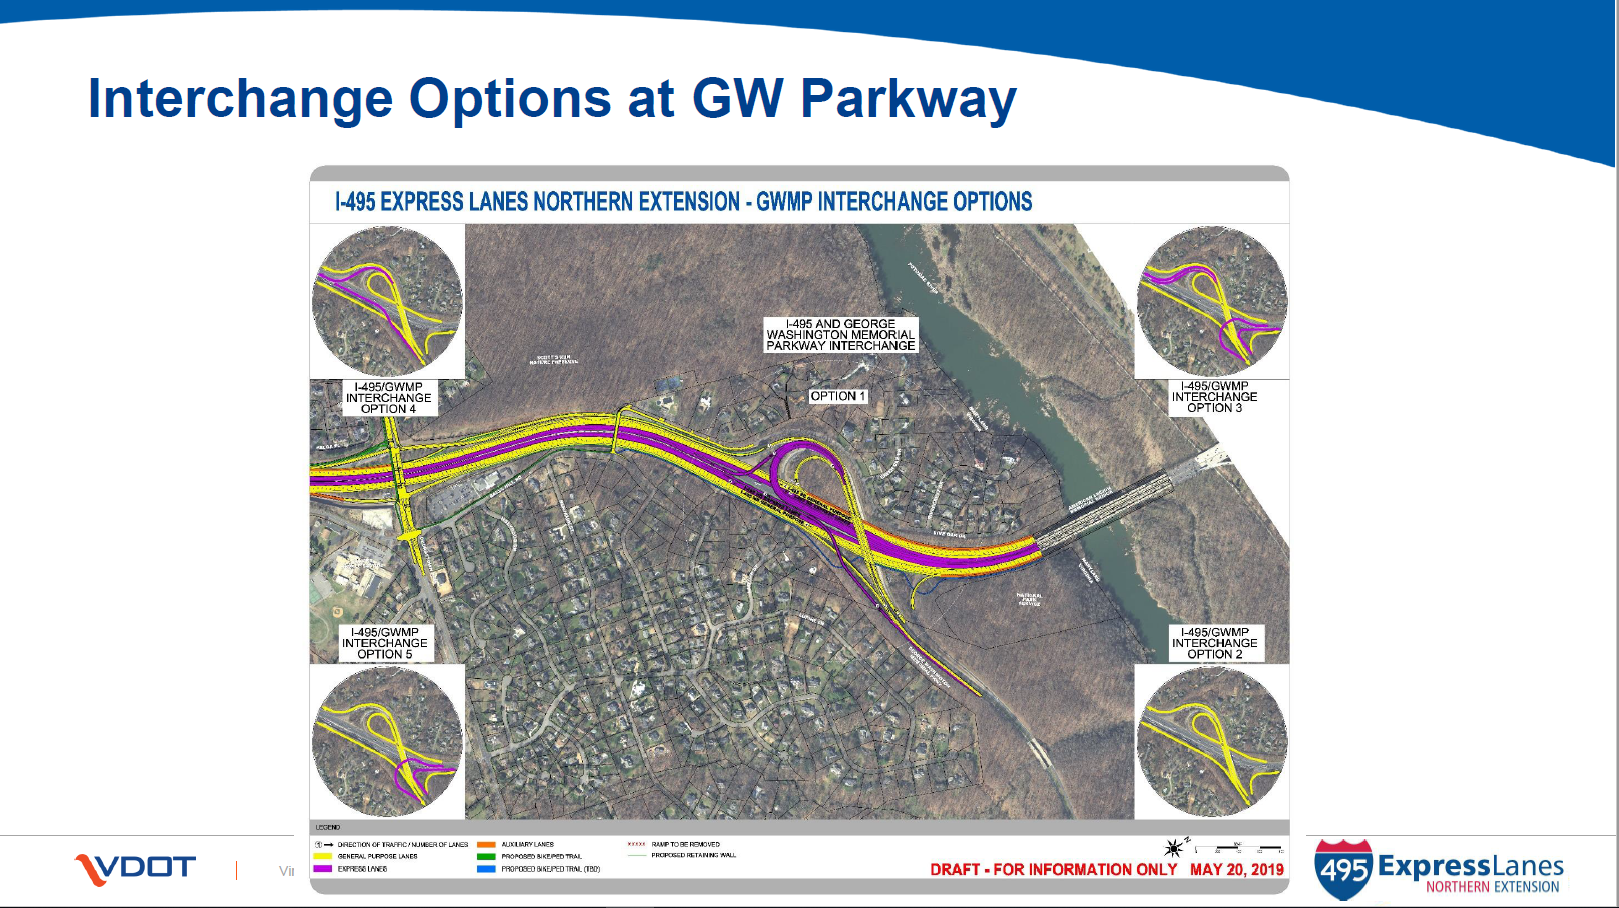 Virginia shares new details on Beltway toll lane extension plans WTOP